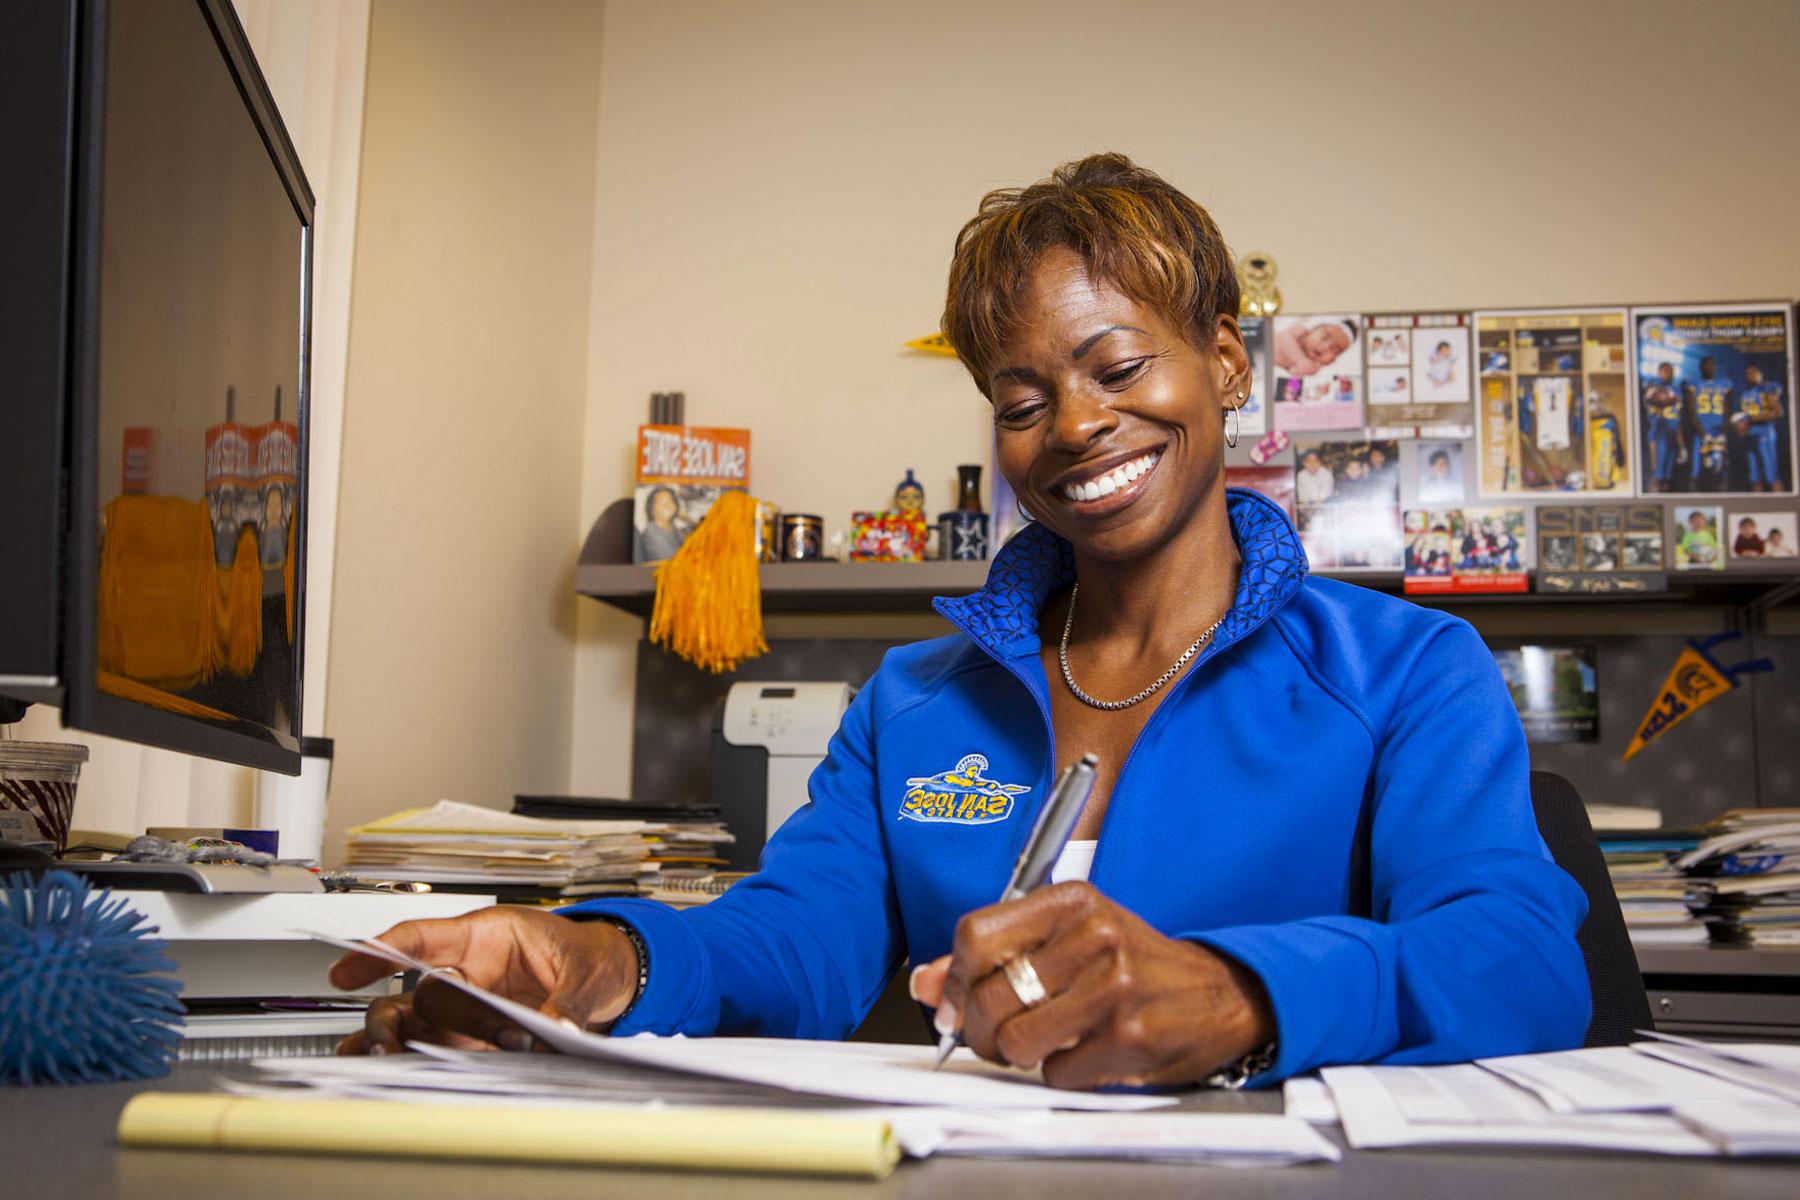 Coleetta McElroy smiling while doing paperwork.